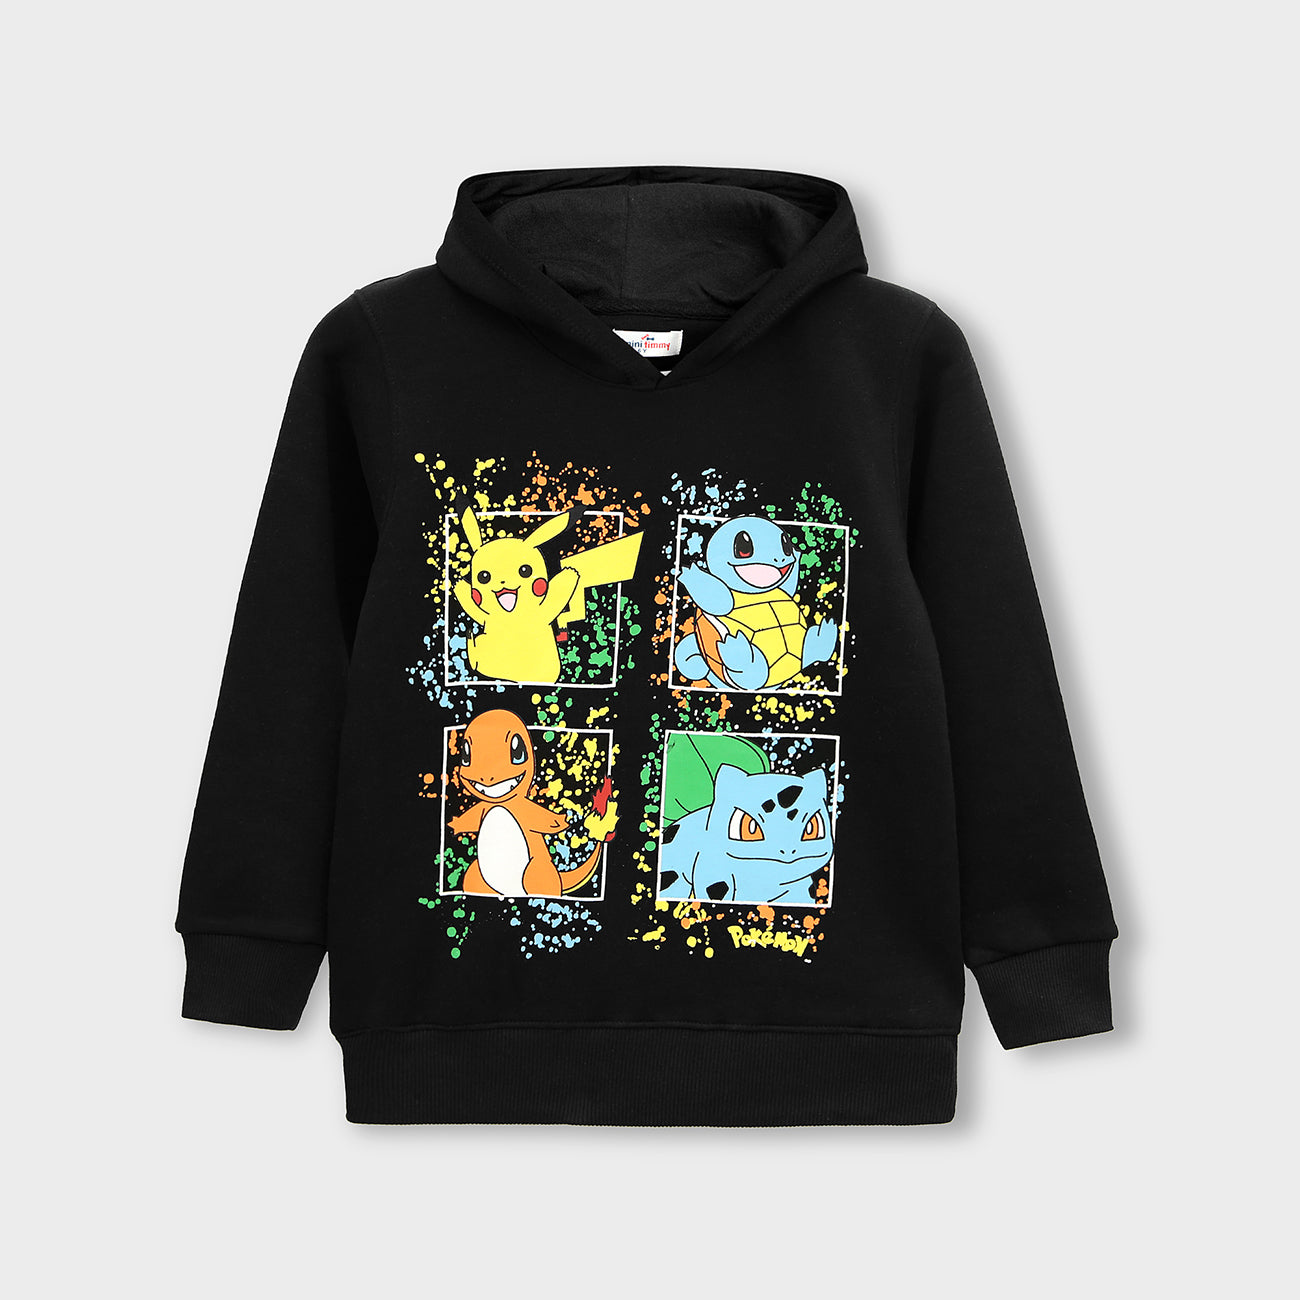 Premium Quality Black Pull-Over "Animated" Printed Fleece Hoodie For Kids (120003)